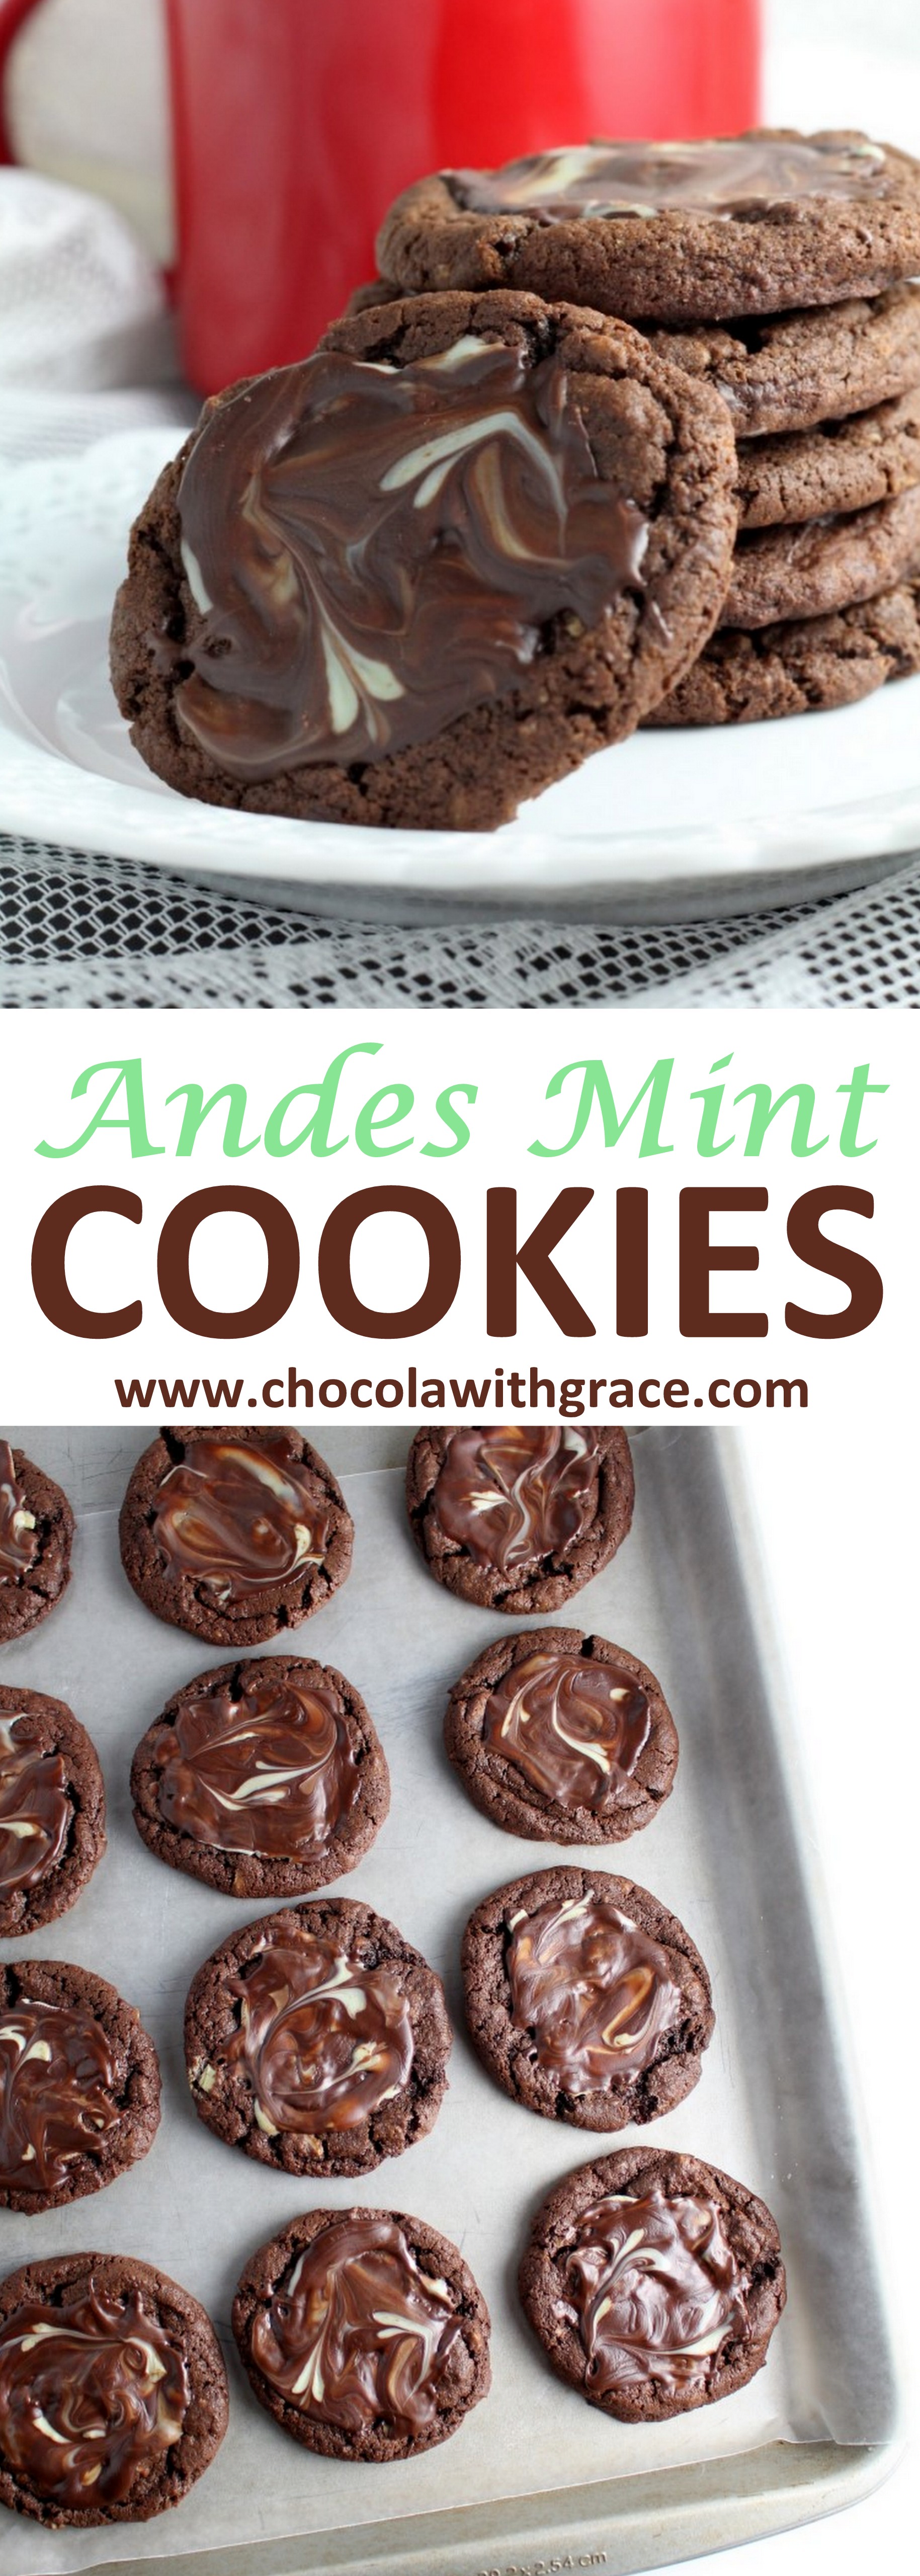 Andes Mint Cookies - Chocolate With Grace